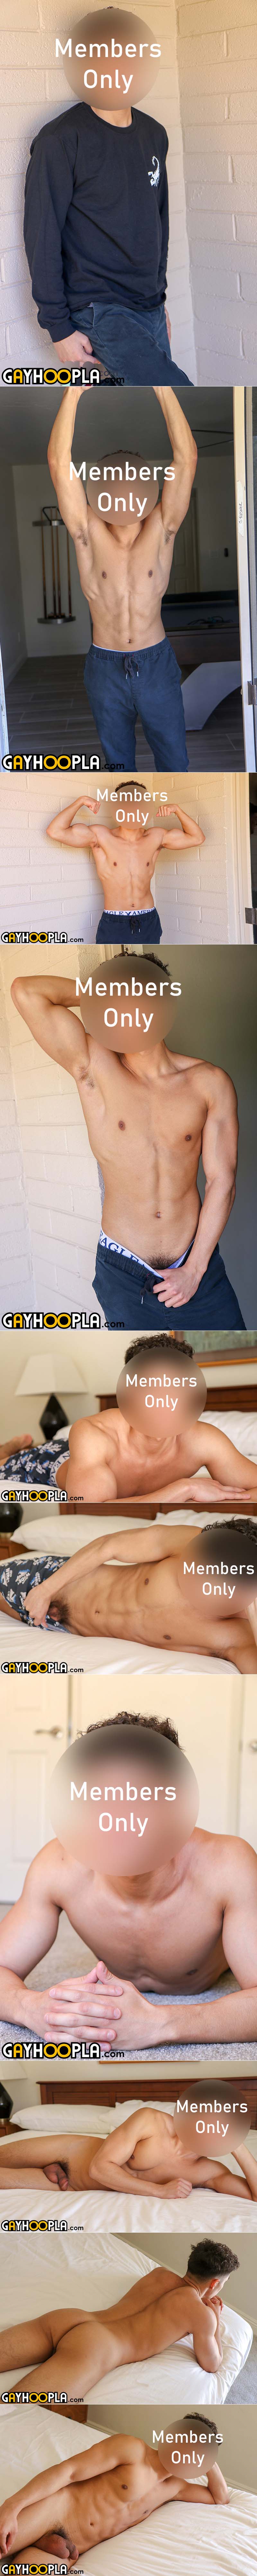 Mystery Members Only Model #13 at GayHoopla